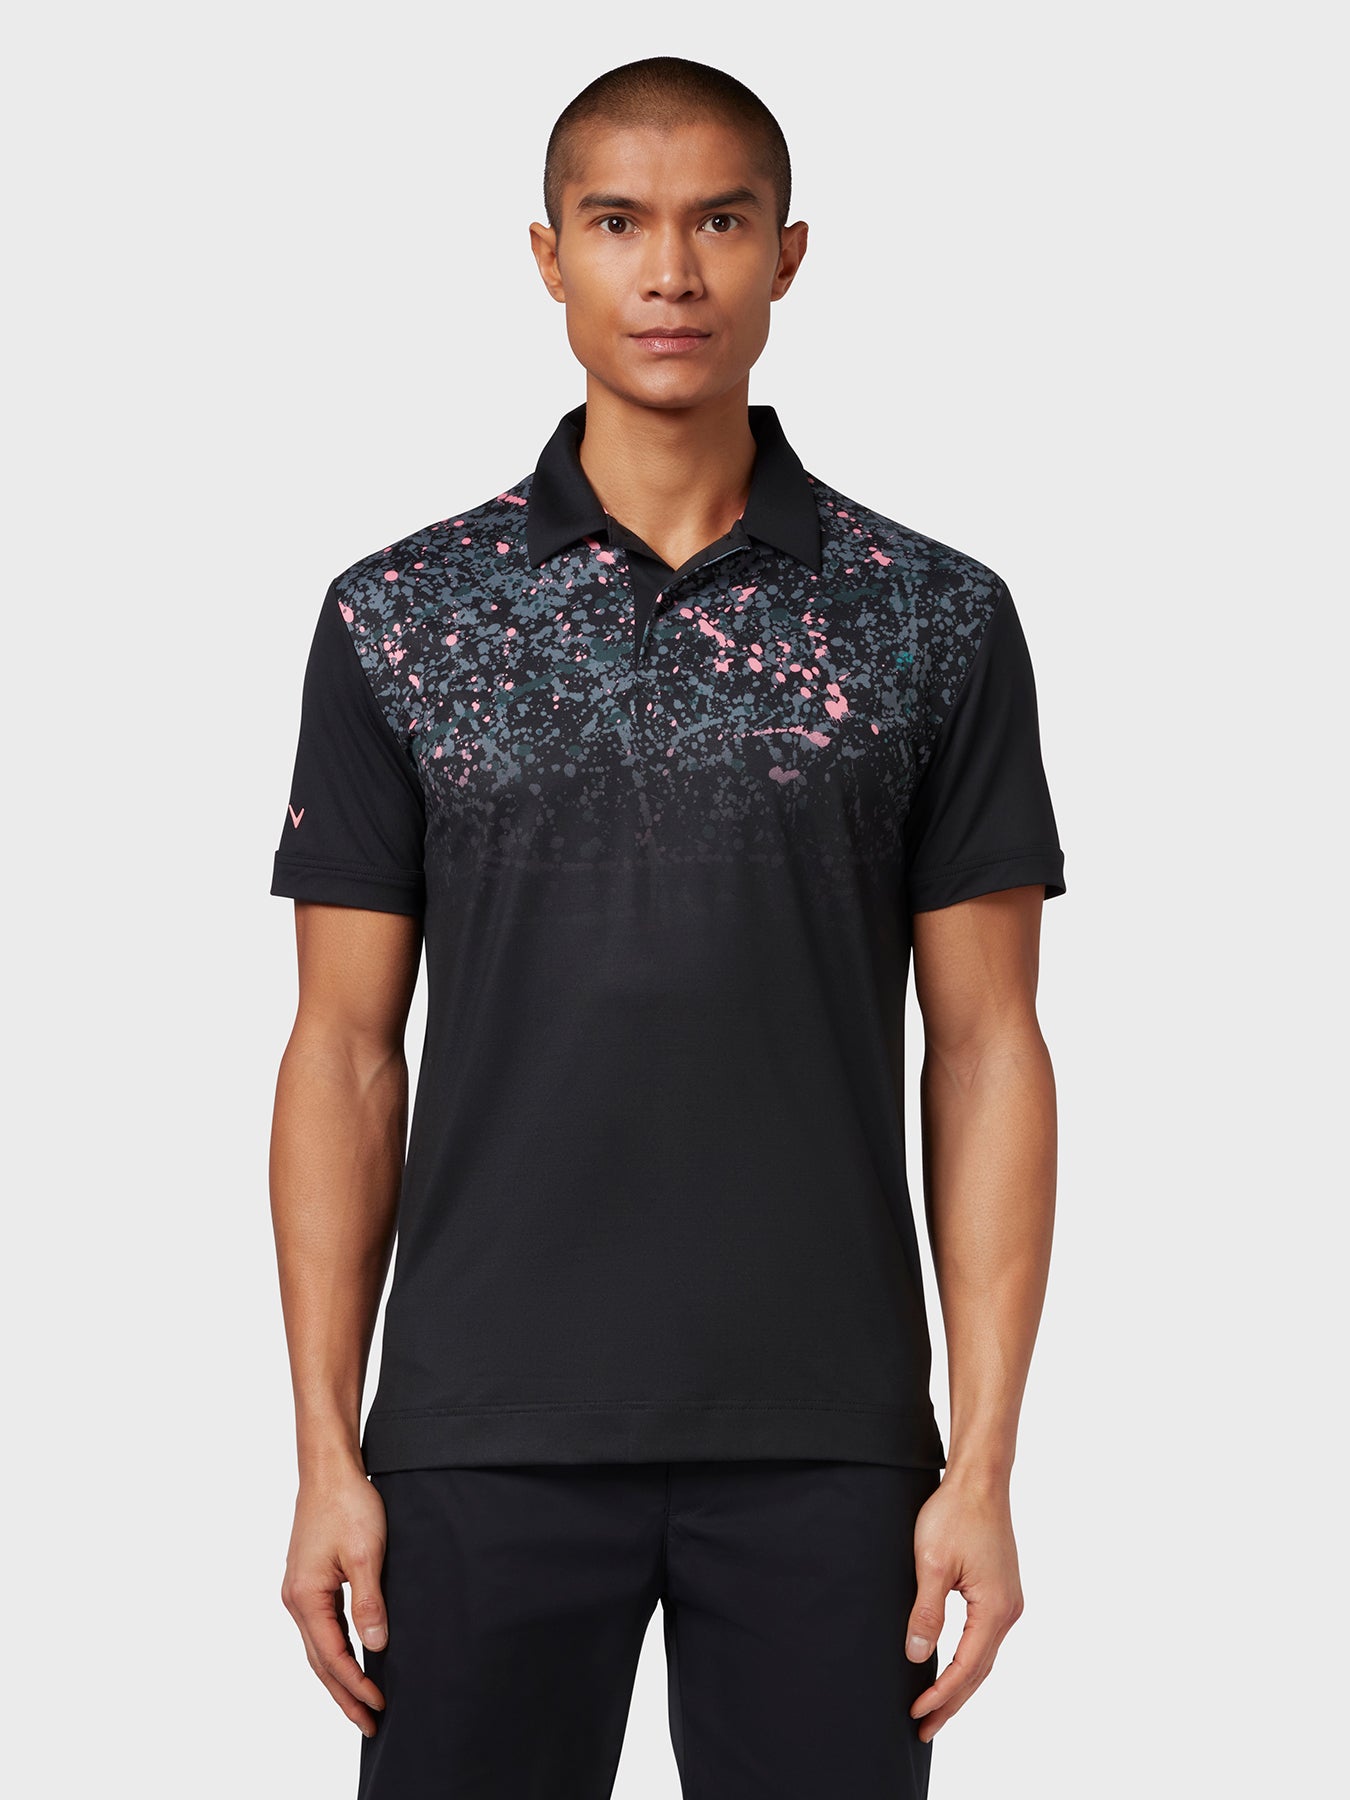 View X Series Splatter Paint Ombre Polo In Caviar information